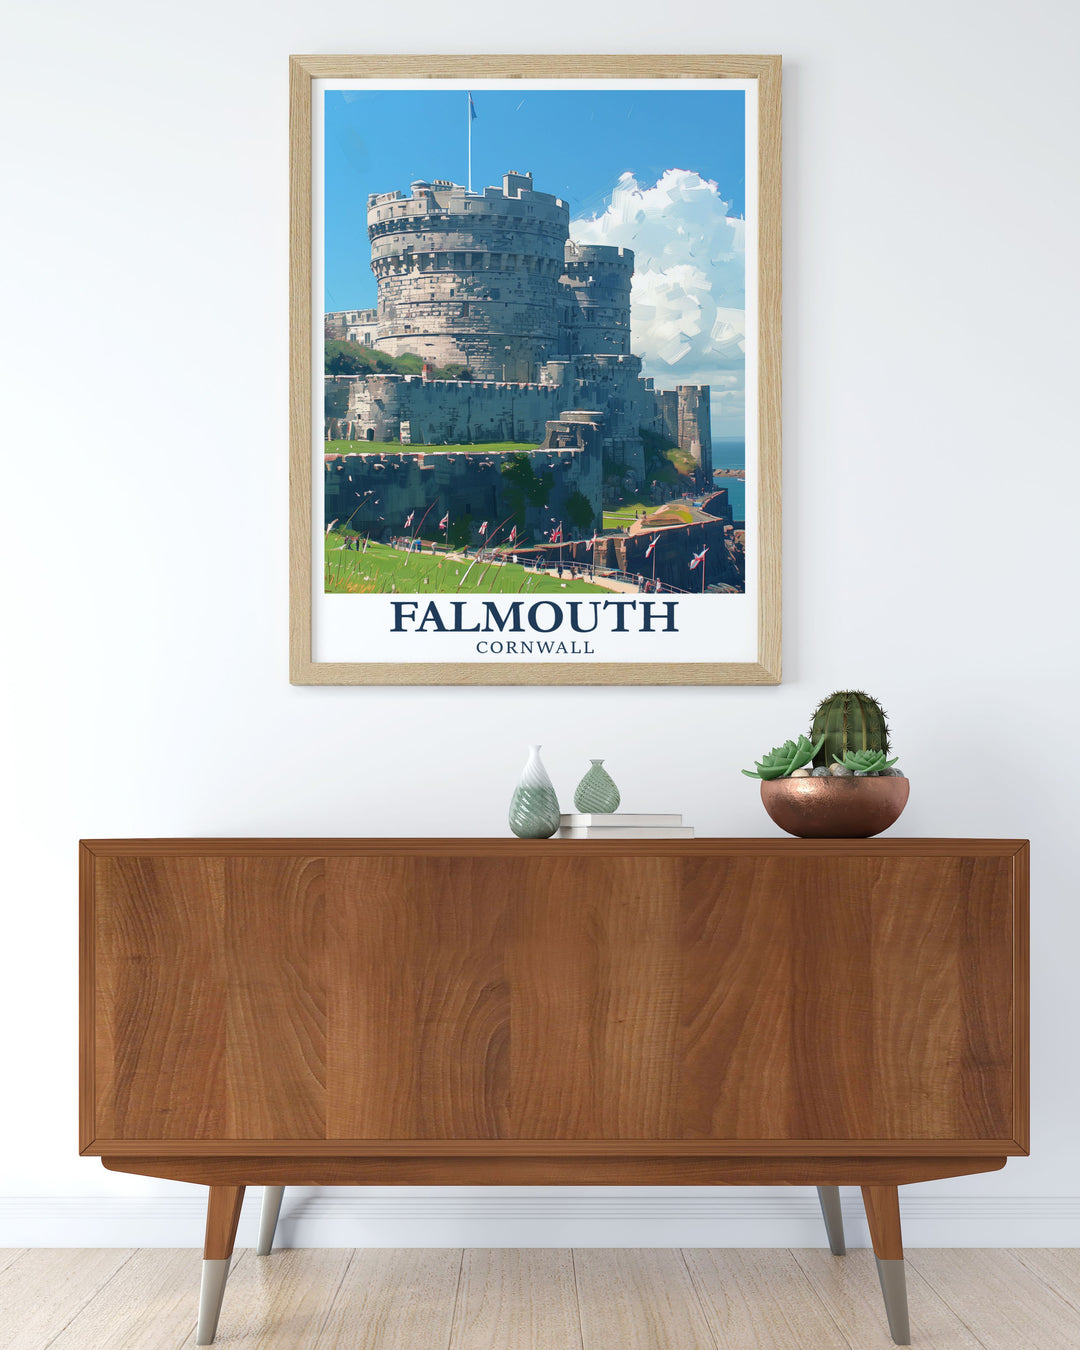 Unique Pendennis Castle home decor print showcasing the iconic landmark in Falmouth, Cornwall. This artwork is a great choice for those who want to bring a piece of Cornwalls history into their interior design.